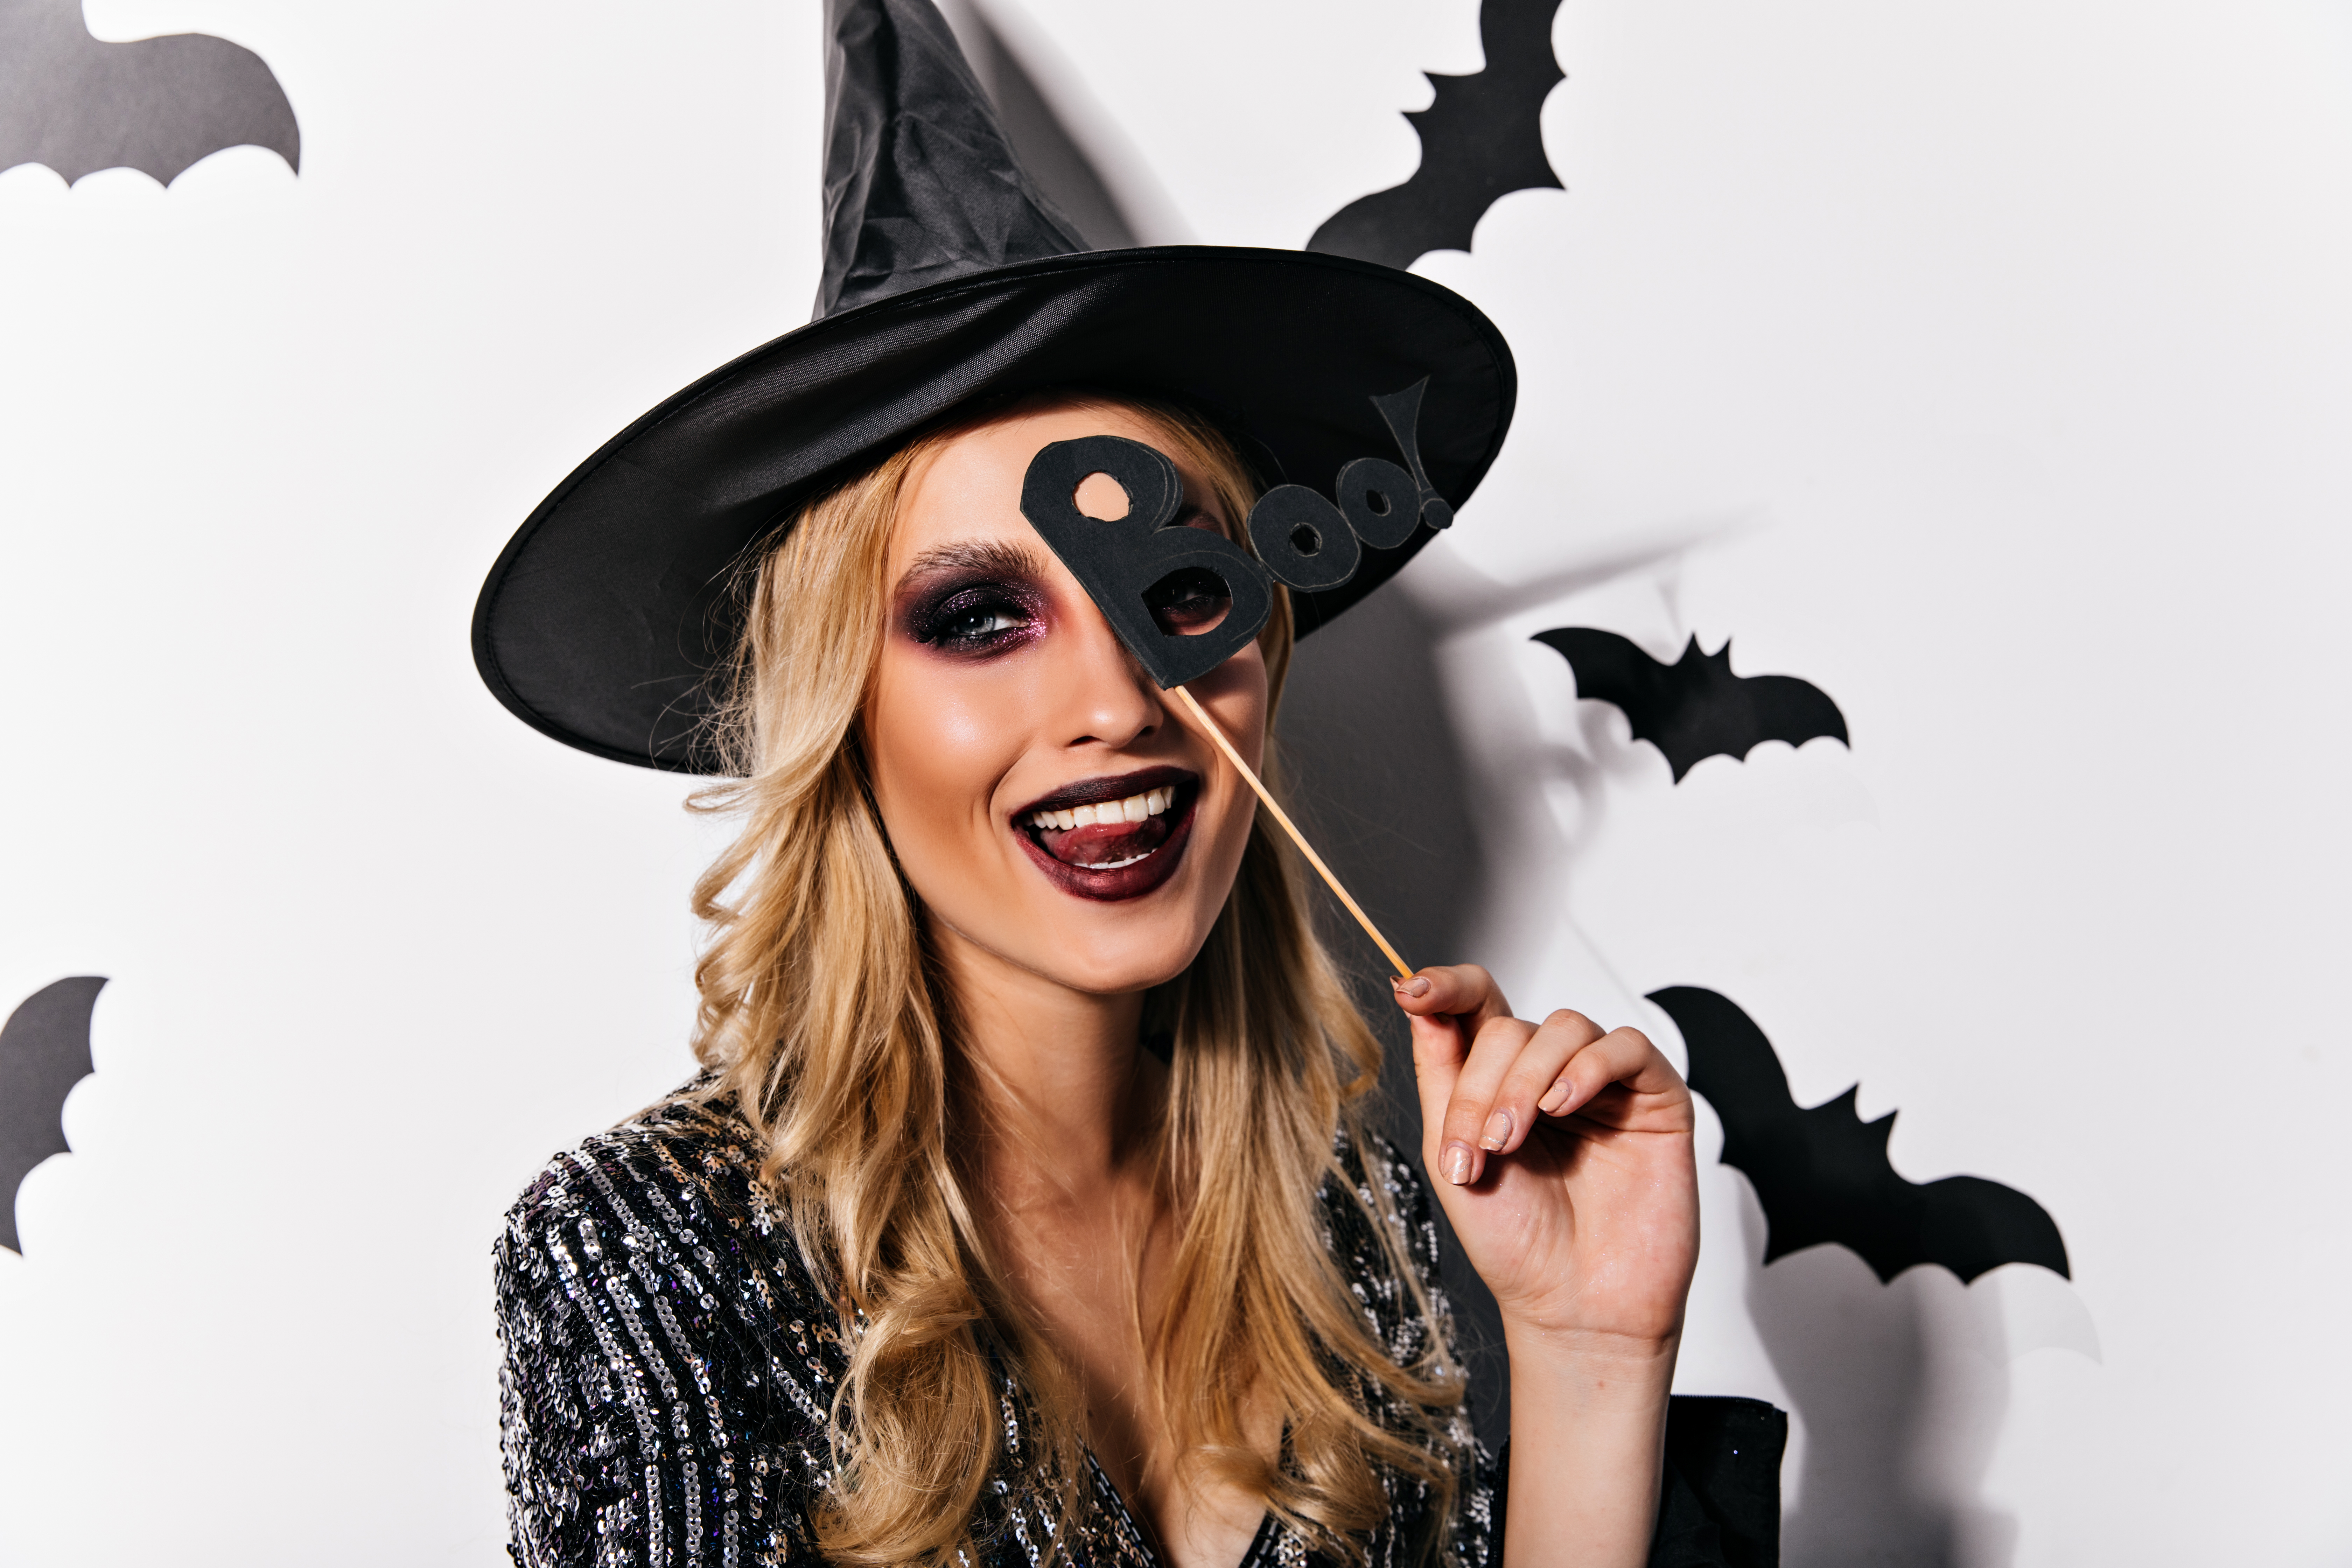 Heading Out For Halloween? Here’s Some Spooky Makeup Inspo To Set The Villanous Vibe